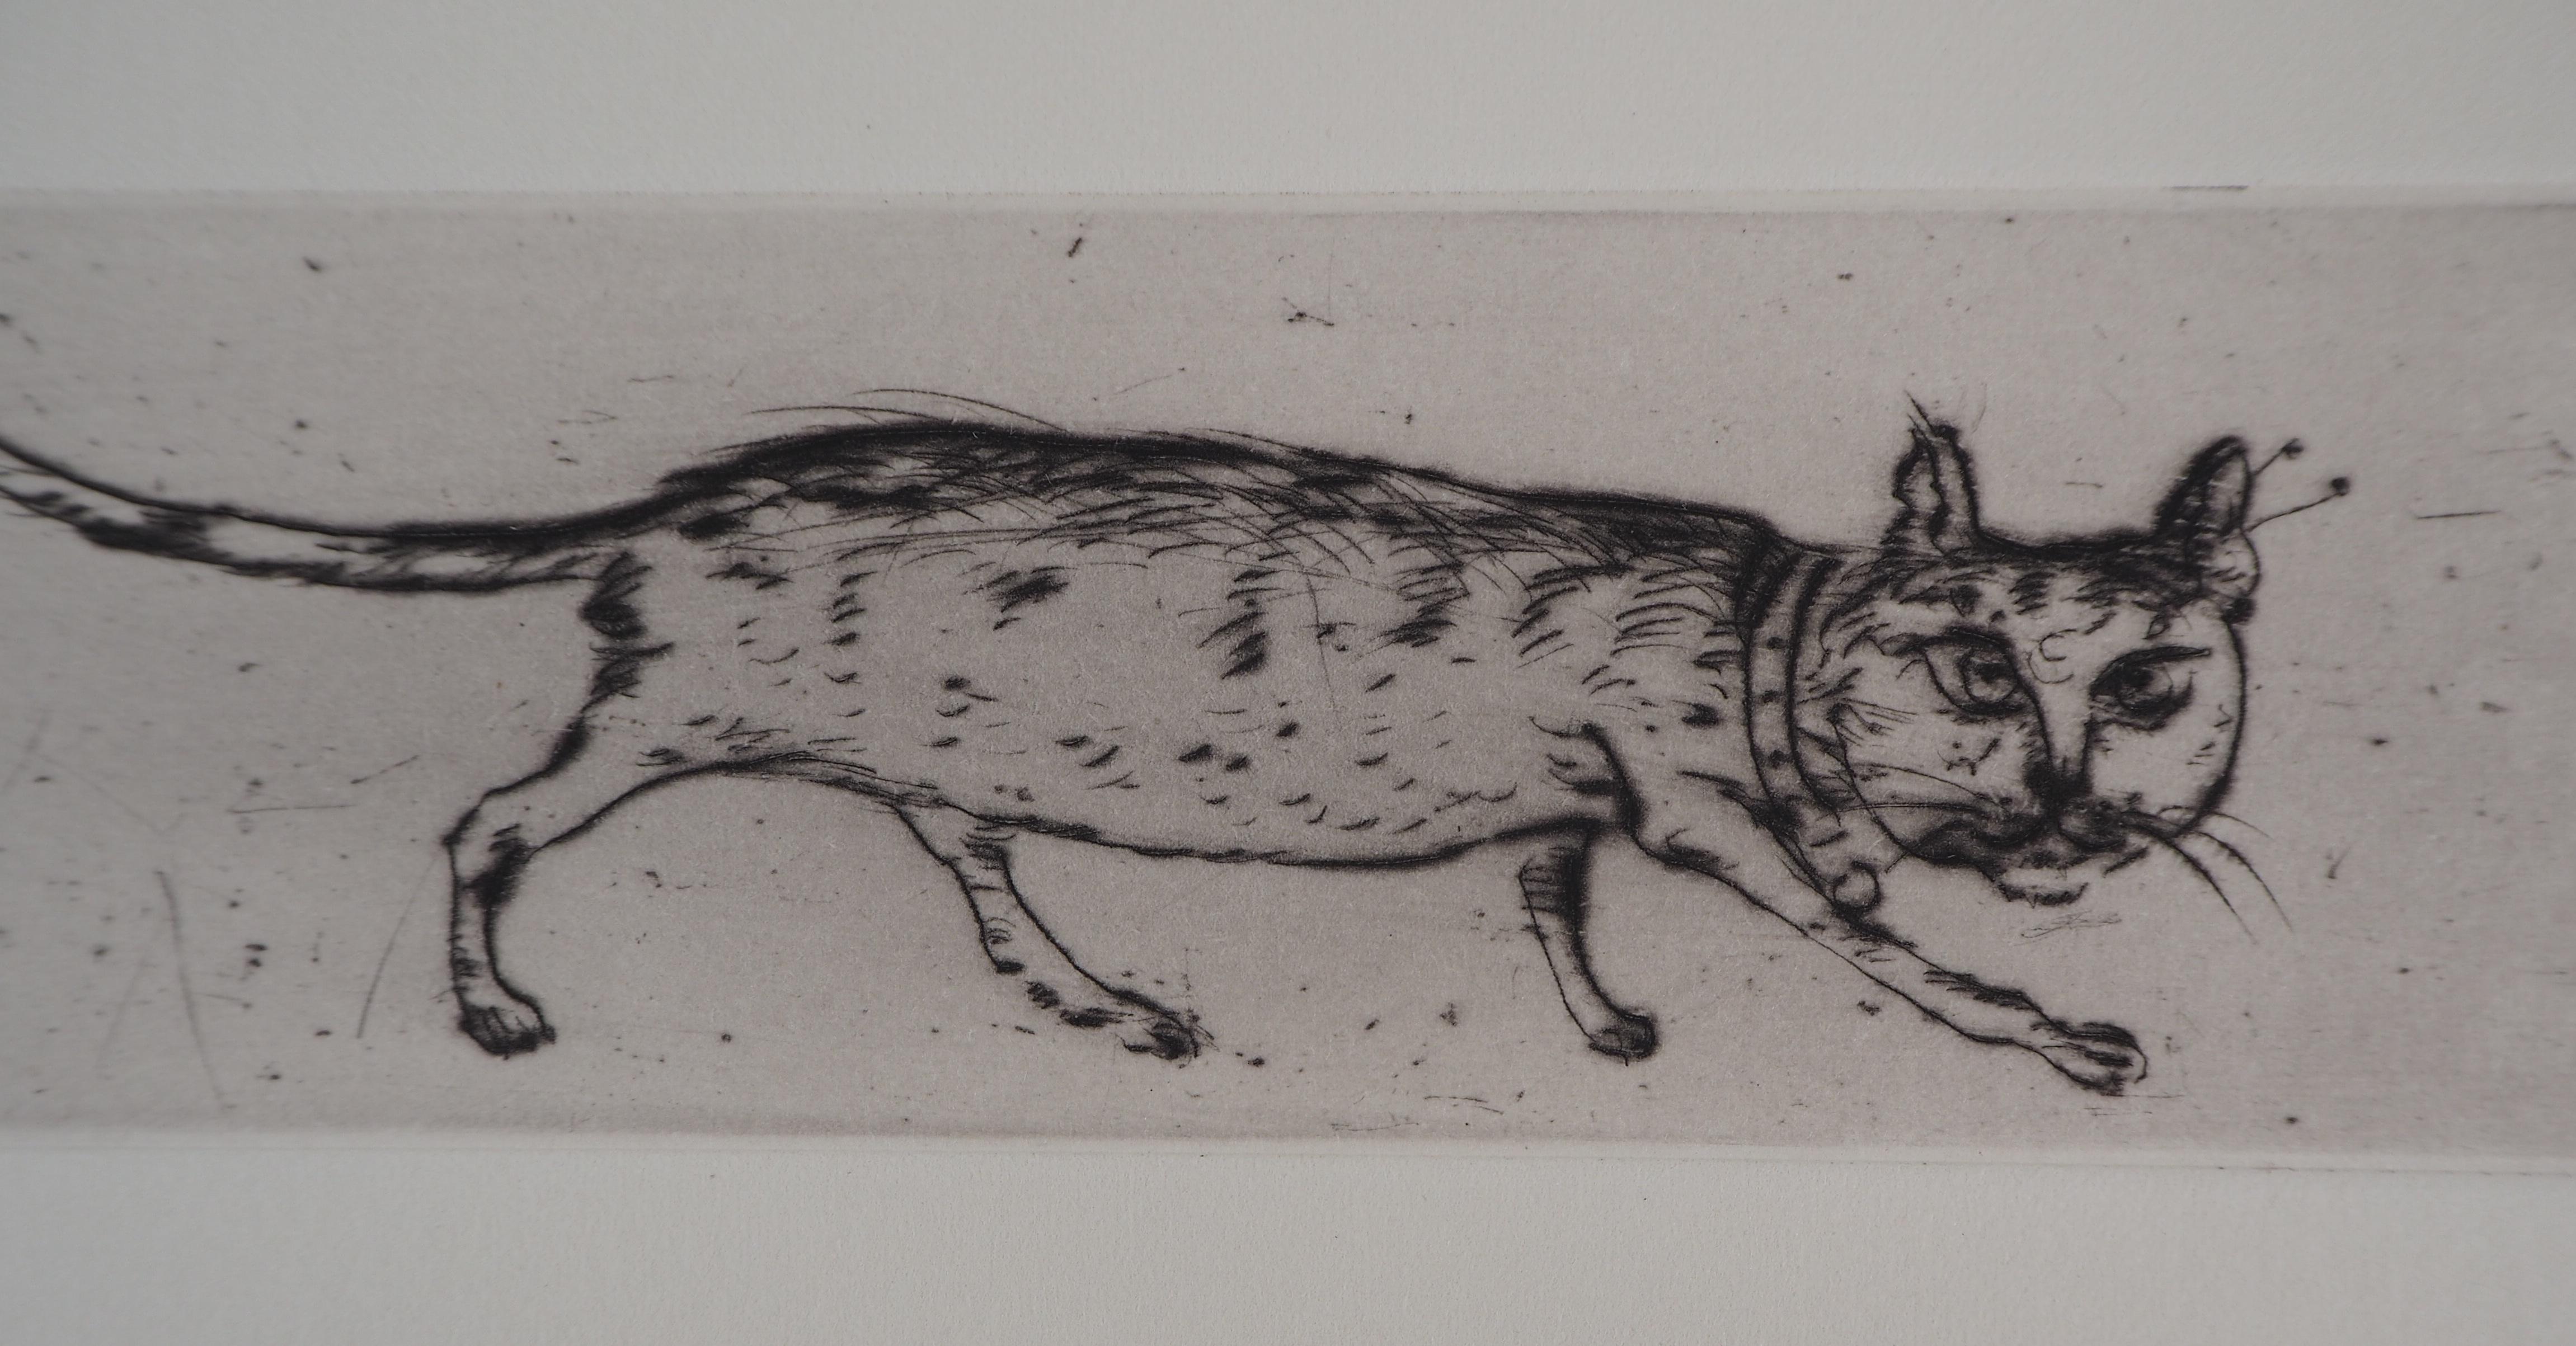 Mordecai MOREH
Cat and Mouse, 1982

Original etching
Handsigned in pencil
Numbered / 300
On vellum 9 x 21 cm (c. 4 x 8 inch)

INFORMATION : This etching was created for the Greeting Card of Galerie Michele Broutta

Excellent condition